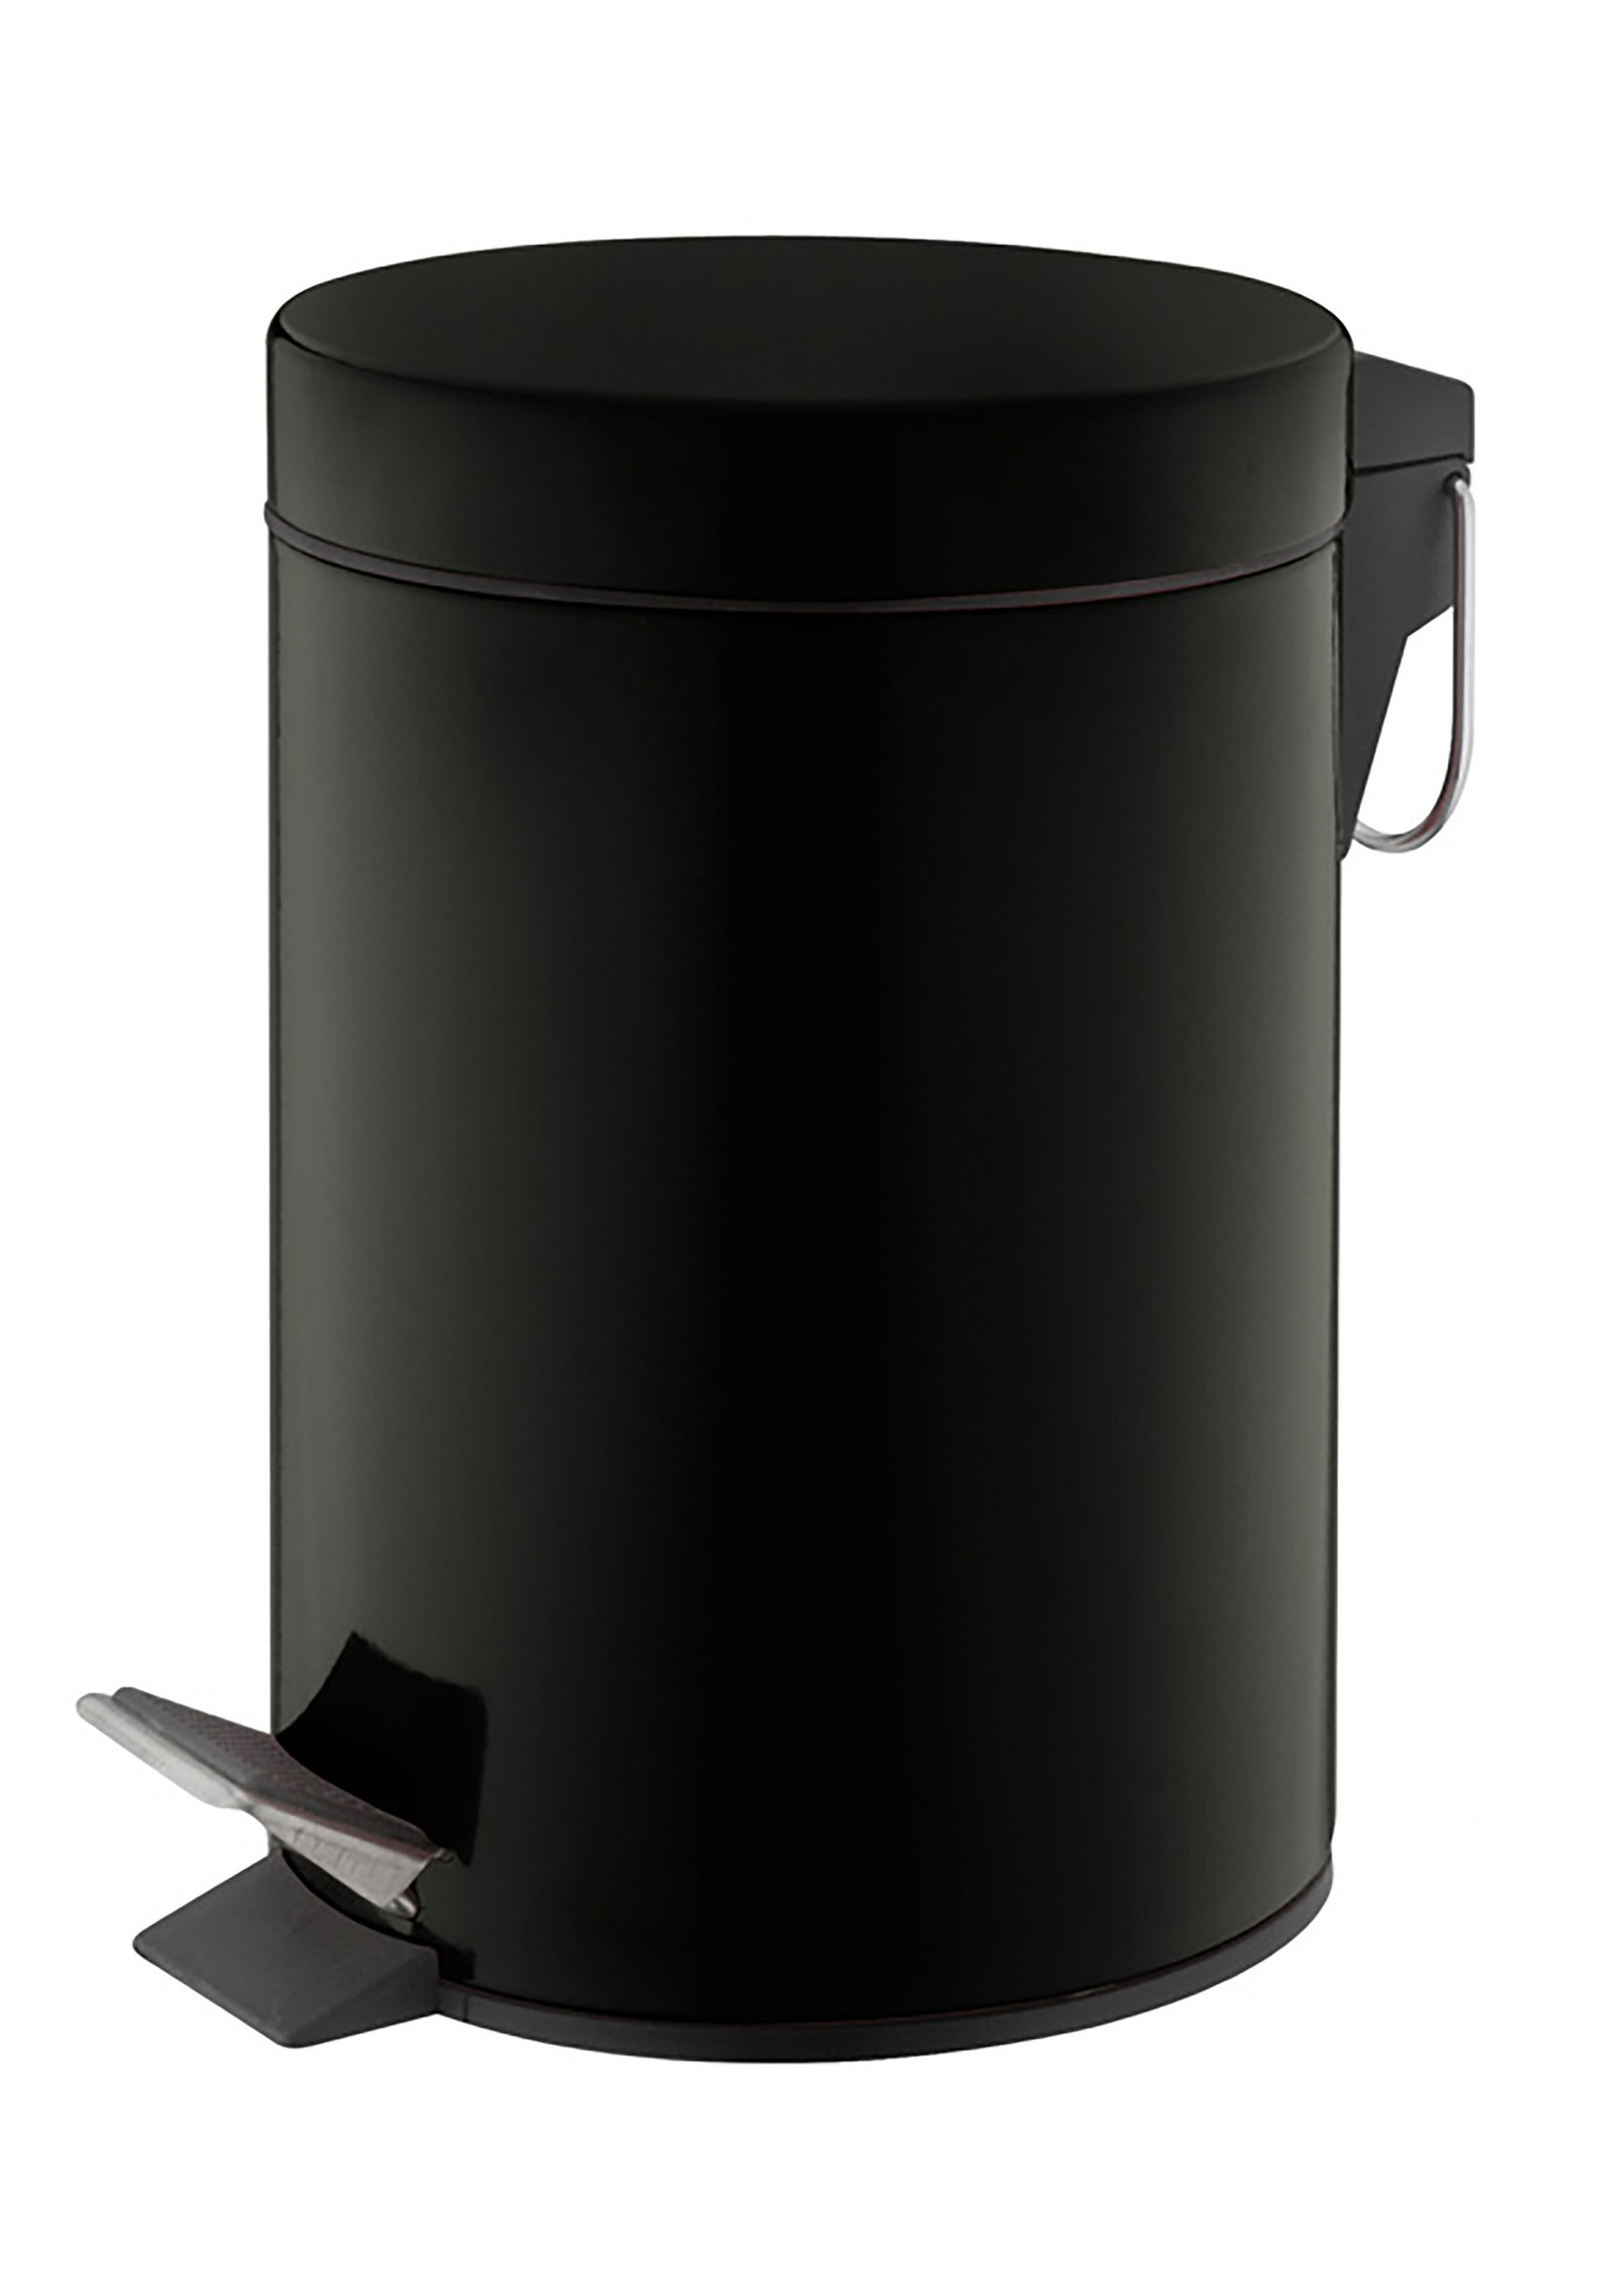 ITY INTERNATIONAL 12L GARBAGE CAN